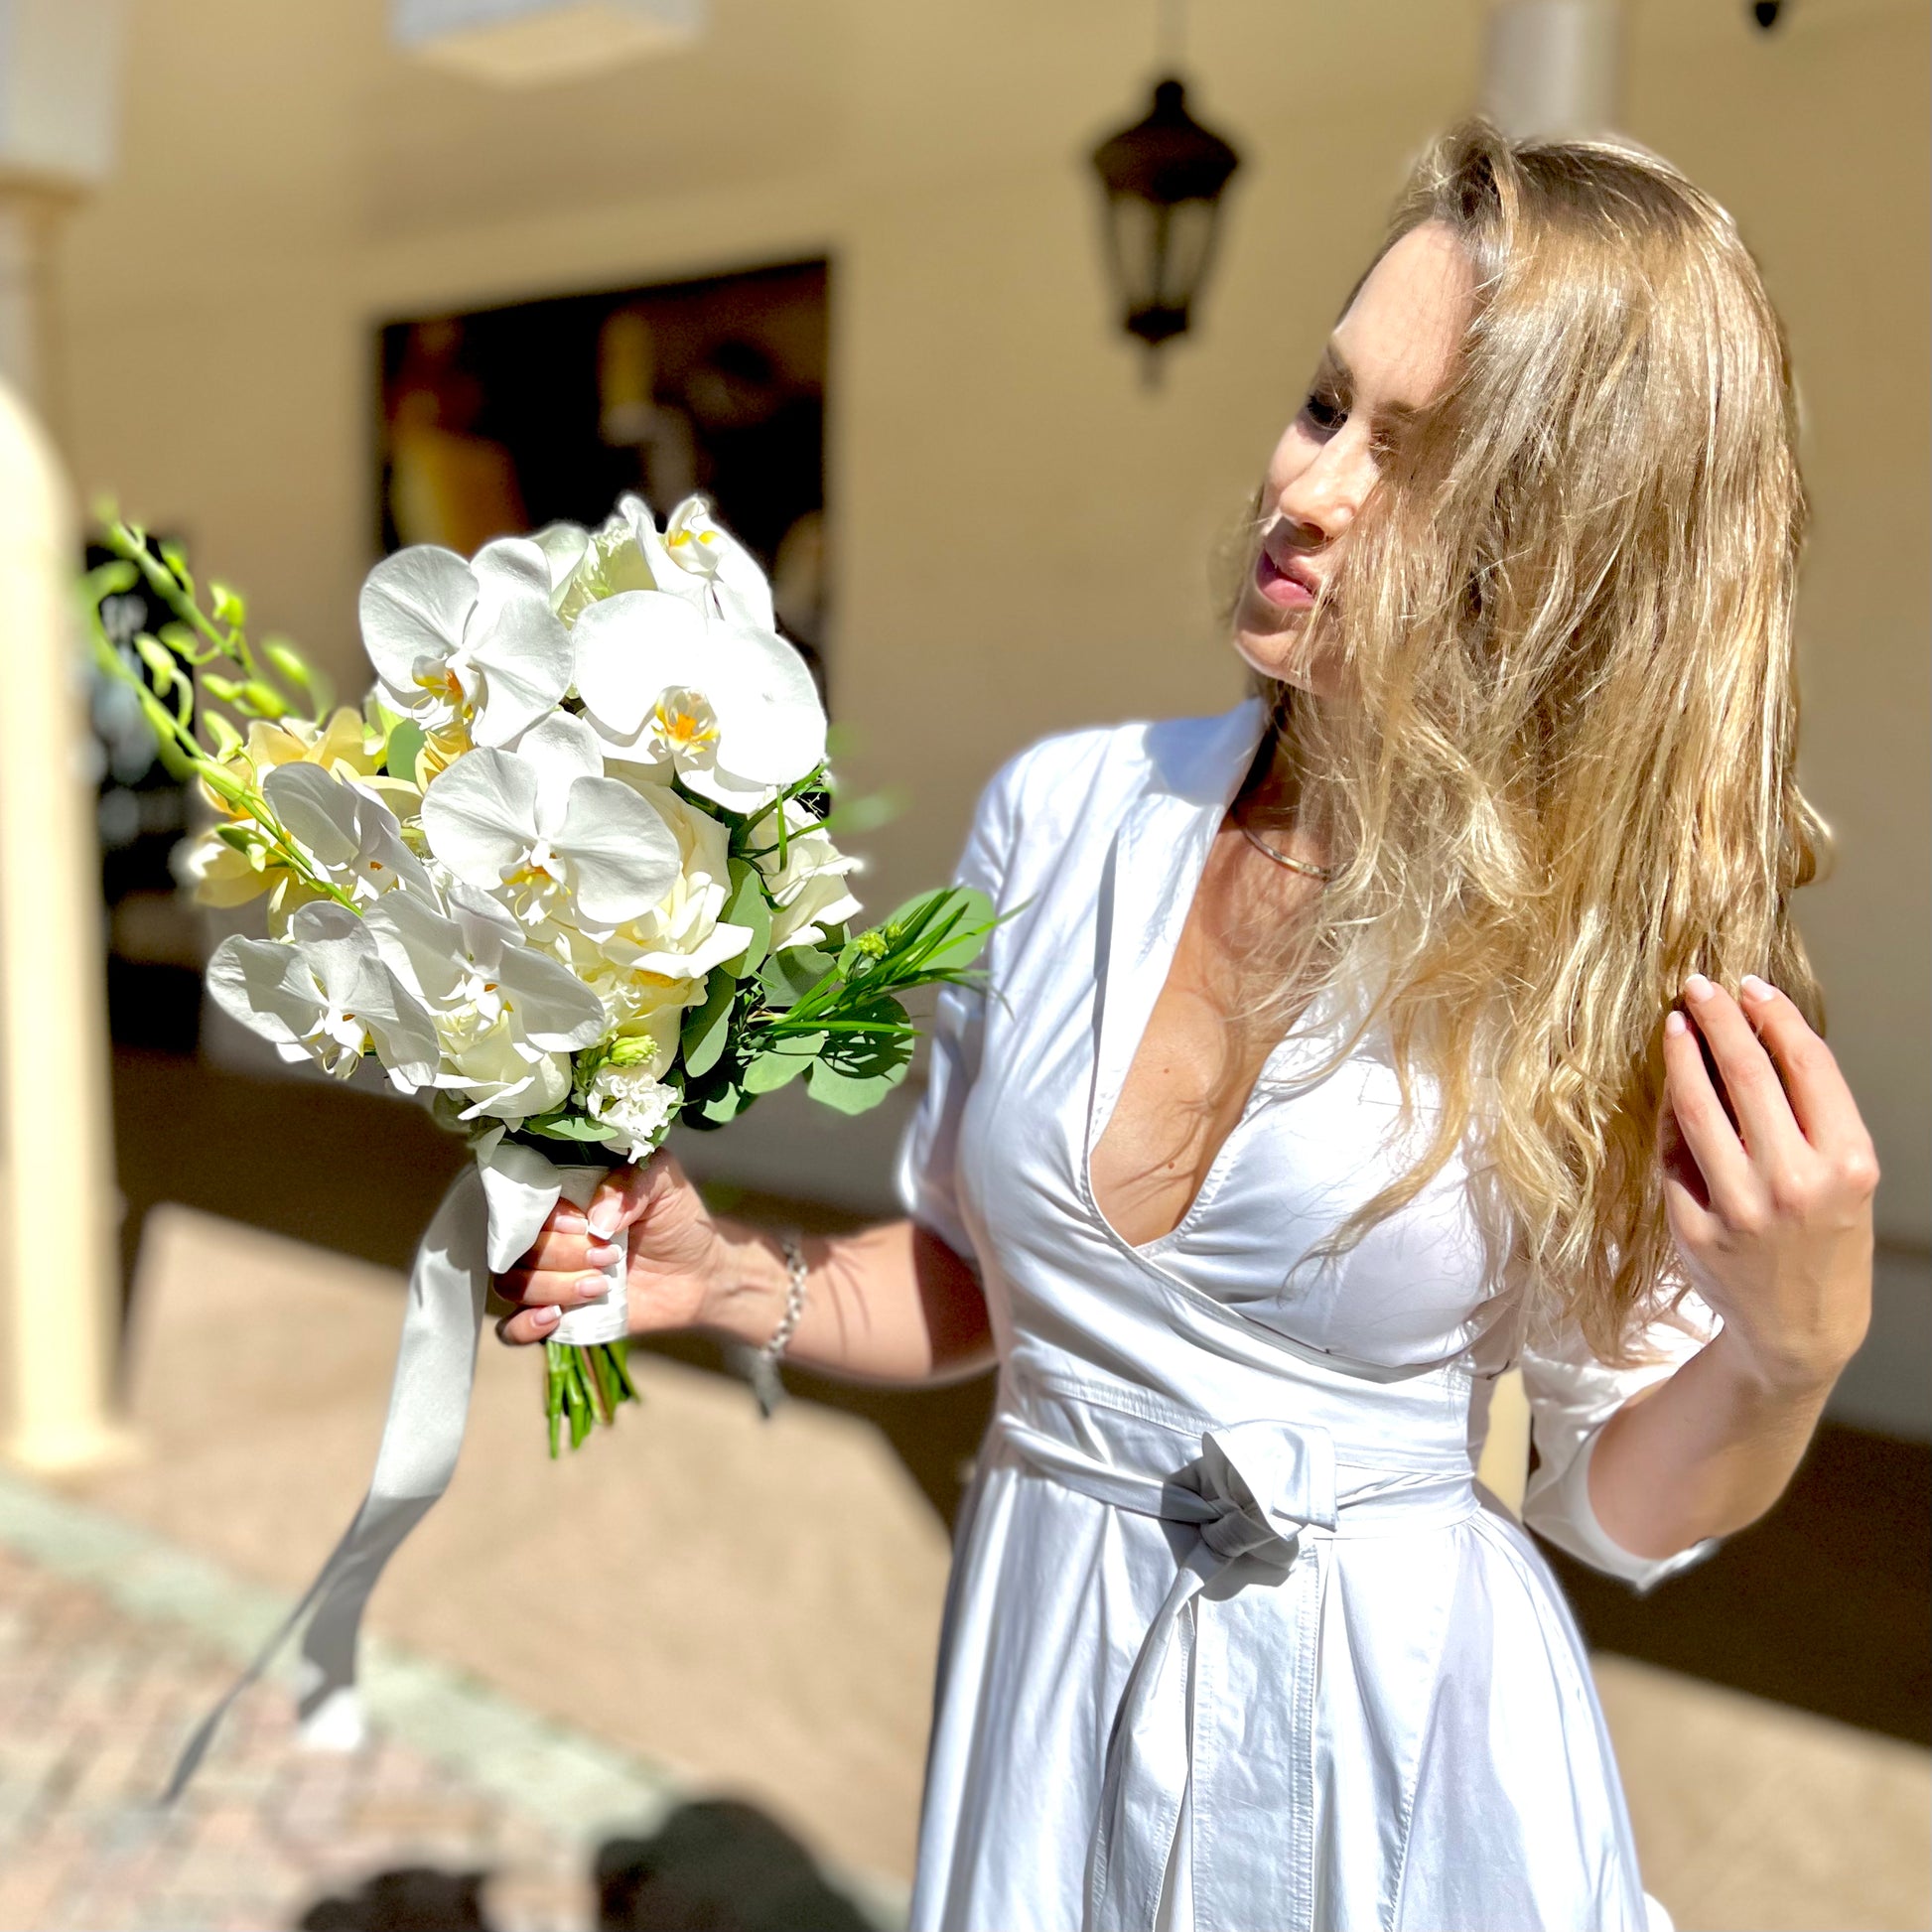 A woman with brown hair holding Bridal Bouquet with Orchids